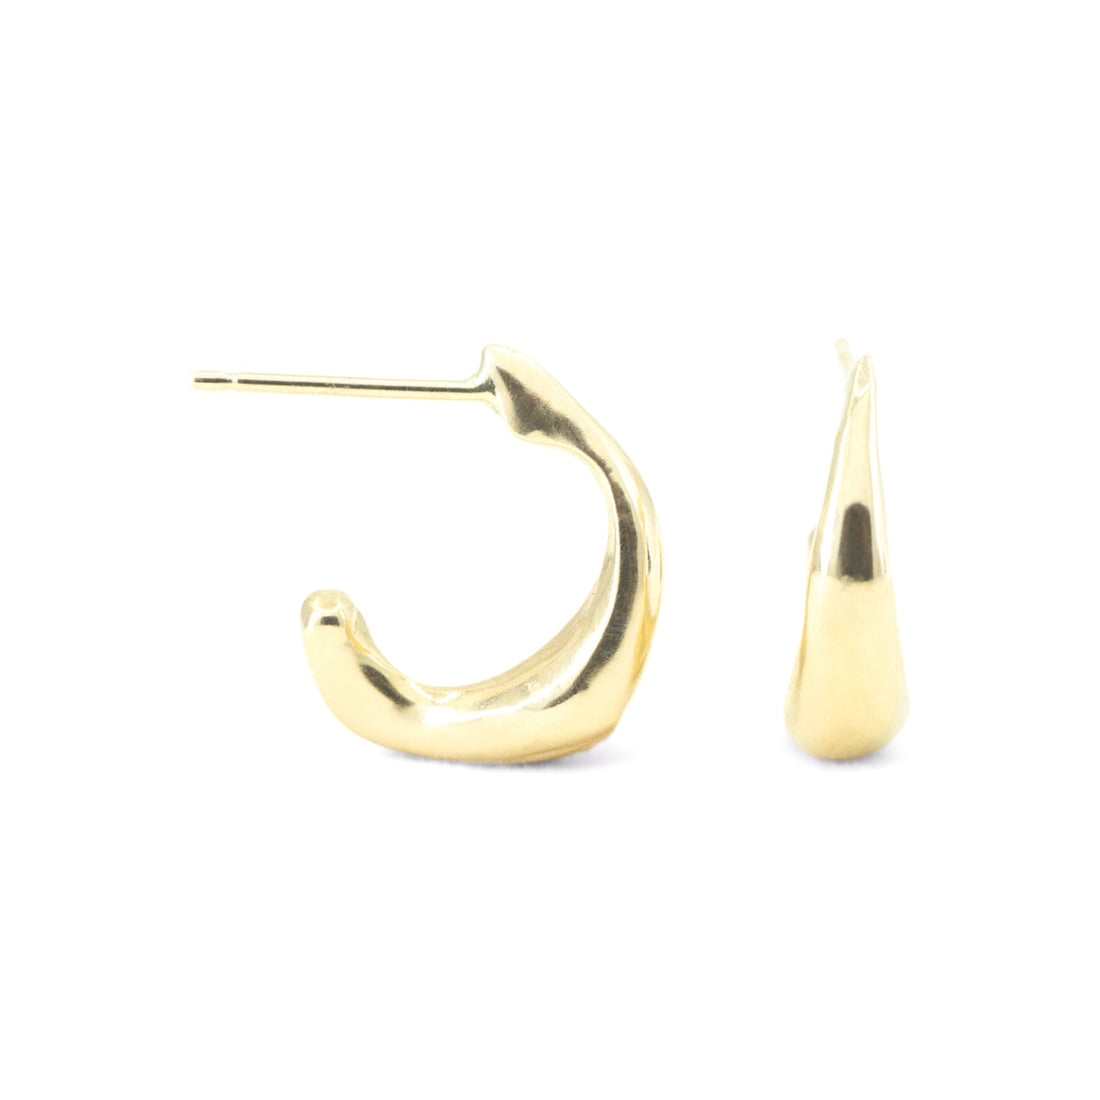 Astra Hoops in 14k yellow gold by Erin Cuff Jewelry.